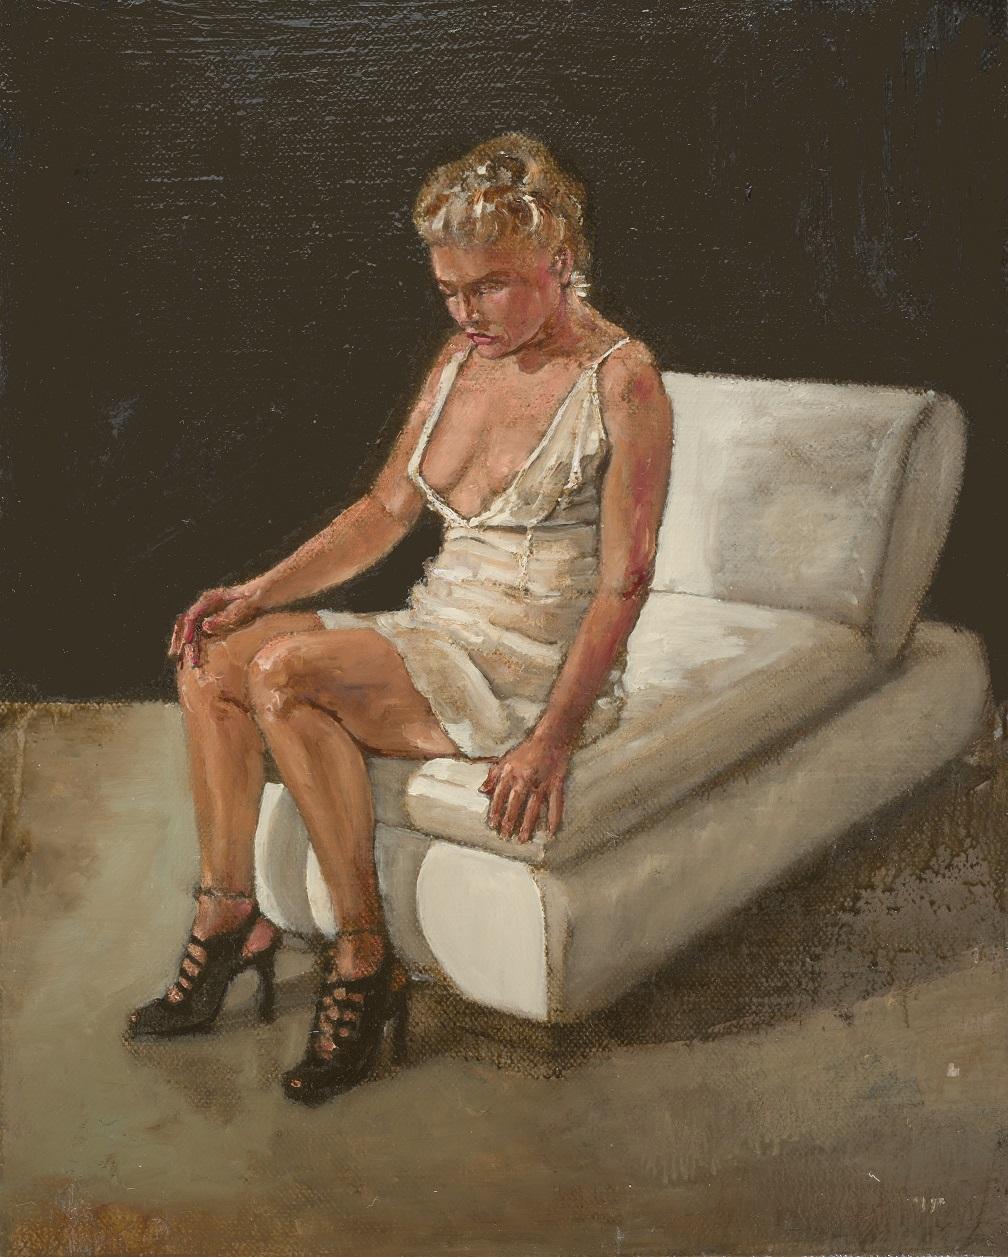 Patrick Pietropoli Figurative Painting - Sitting on a Lounge Chair